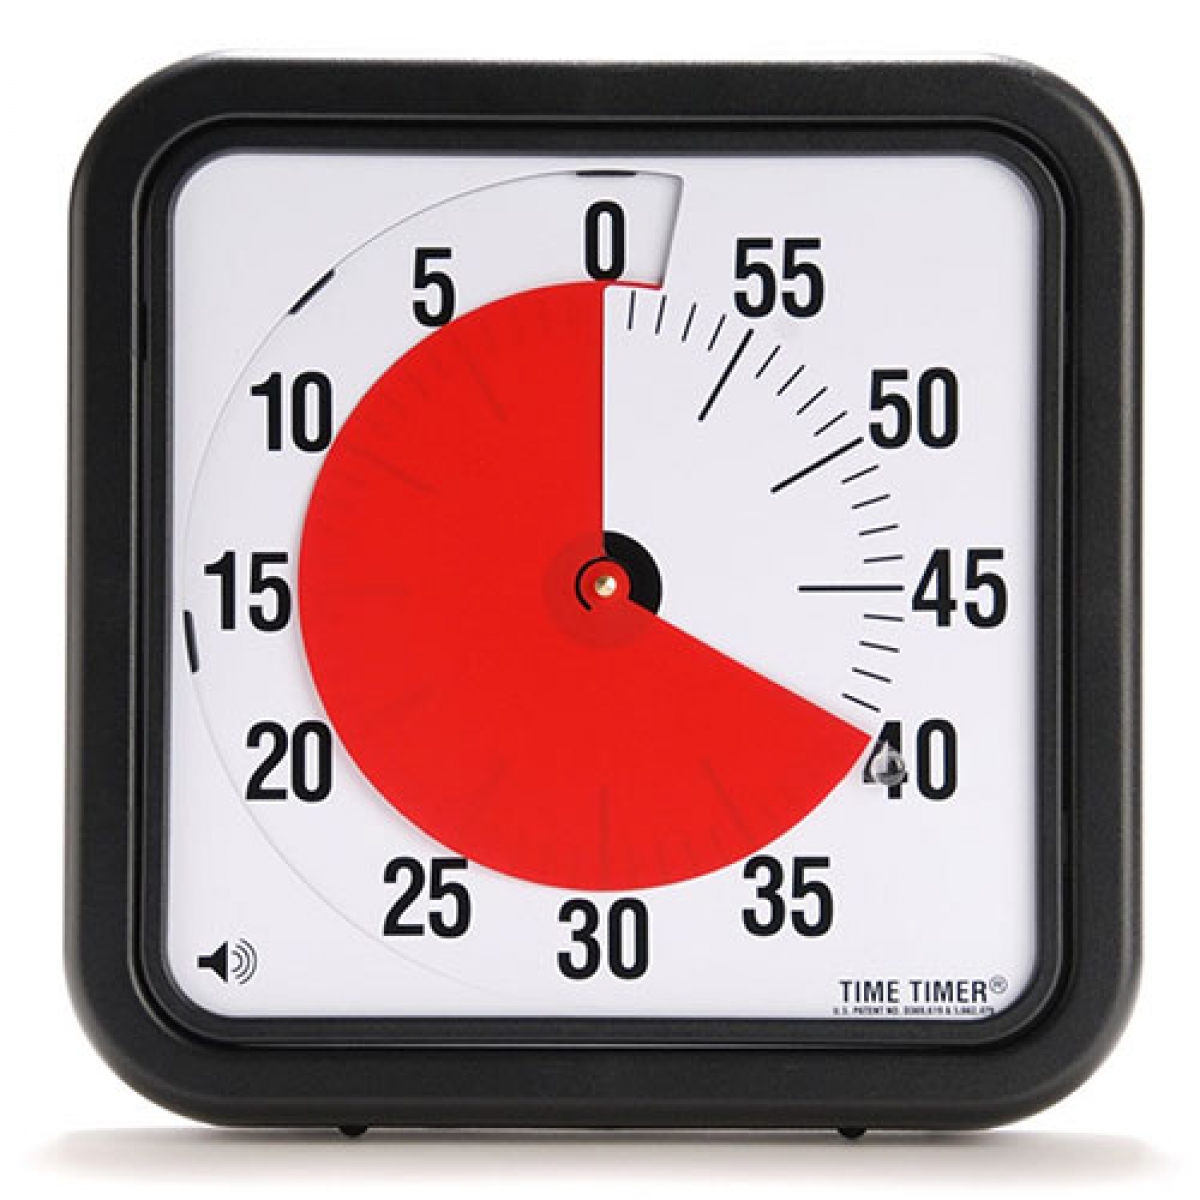 https://www.autism-products.com/wp-content/uploads/Time-Timer-Audible-Countdown-Timer-12-inch-1200x1200.jpg